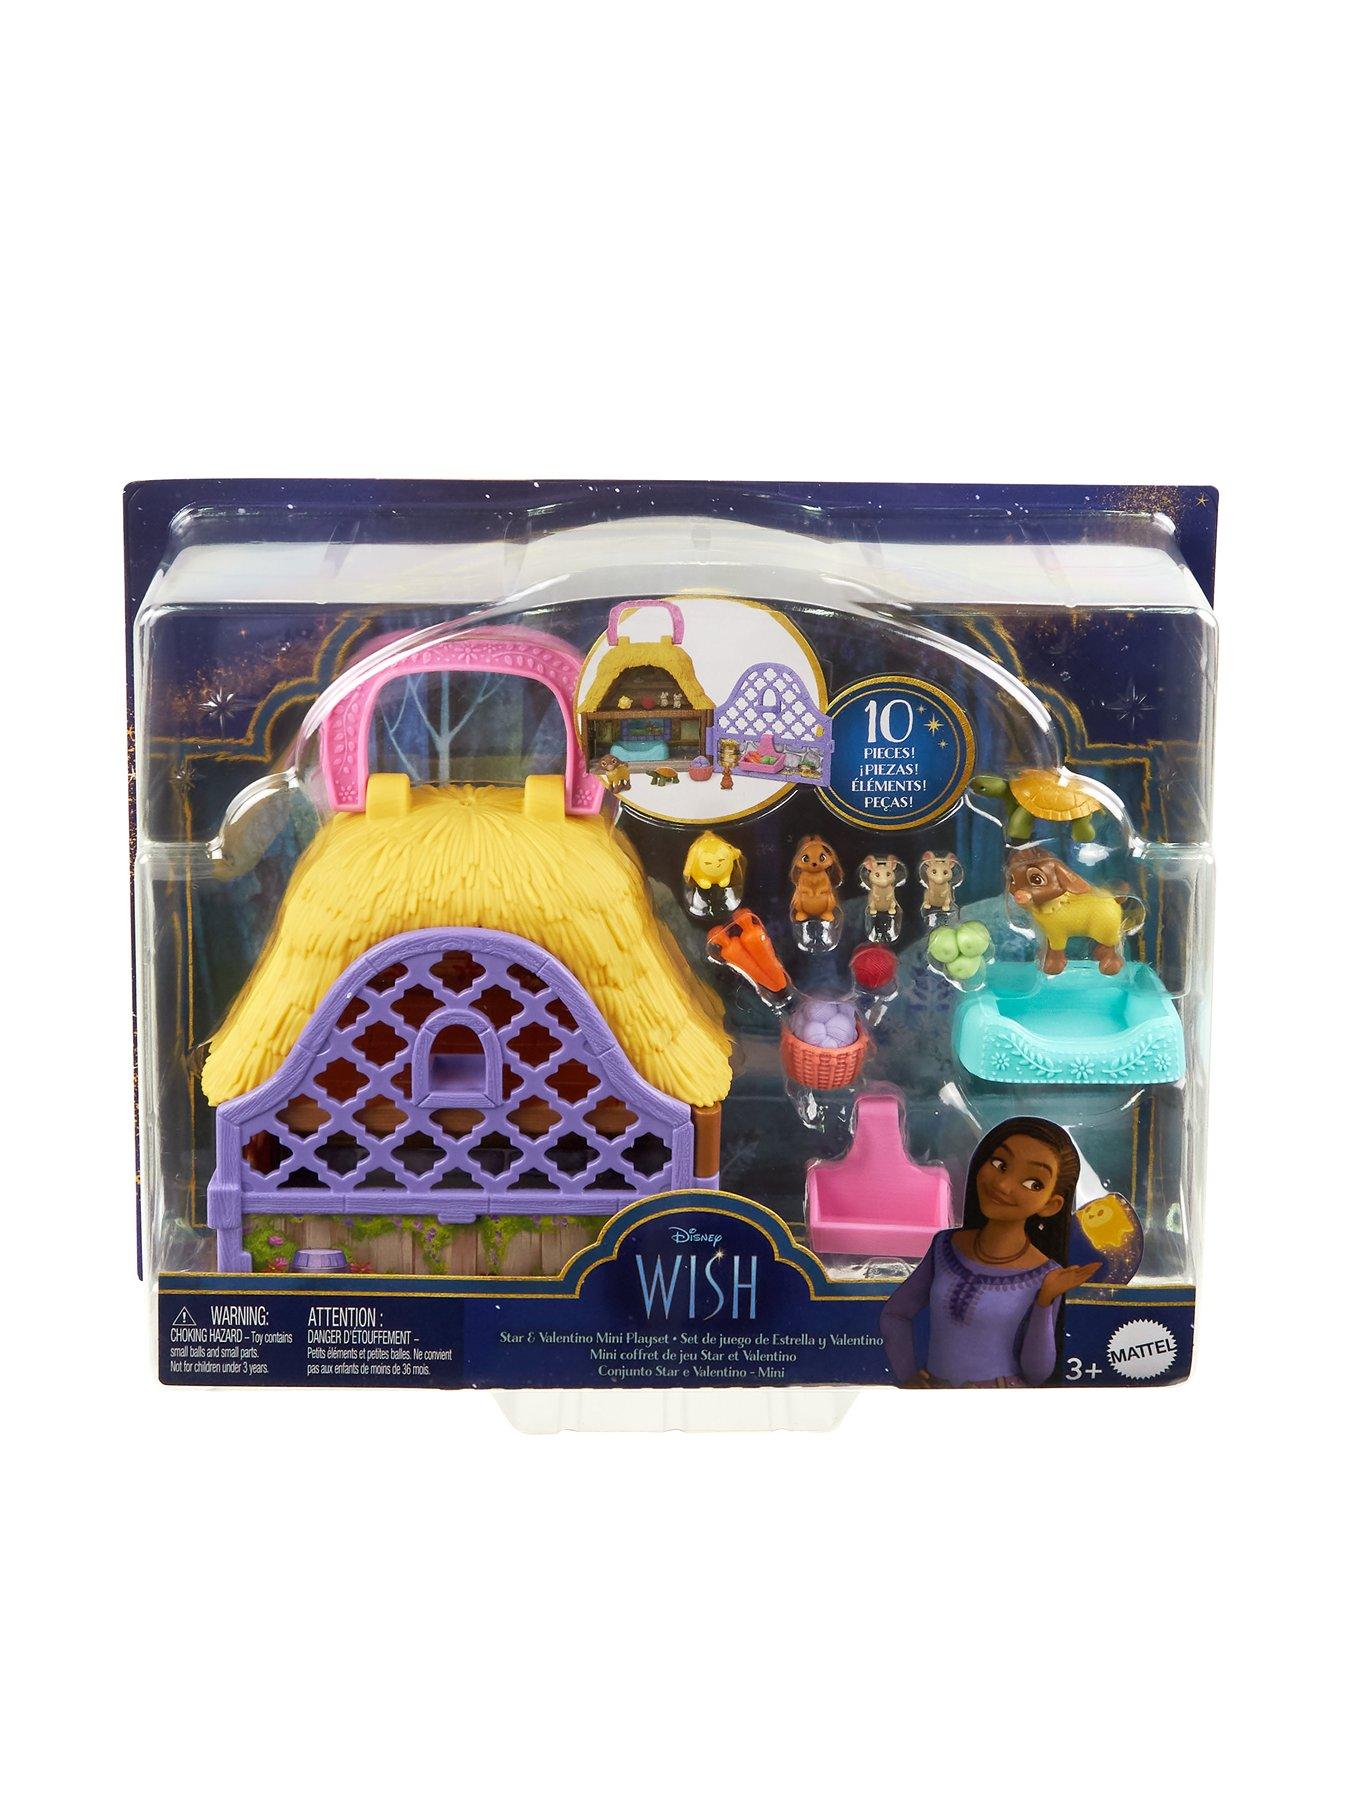 Disney's Wish Cottage Home Small Doll Playset